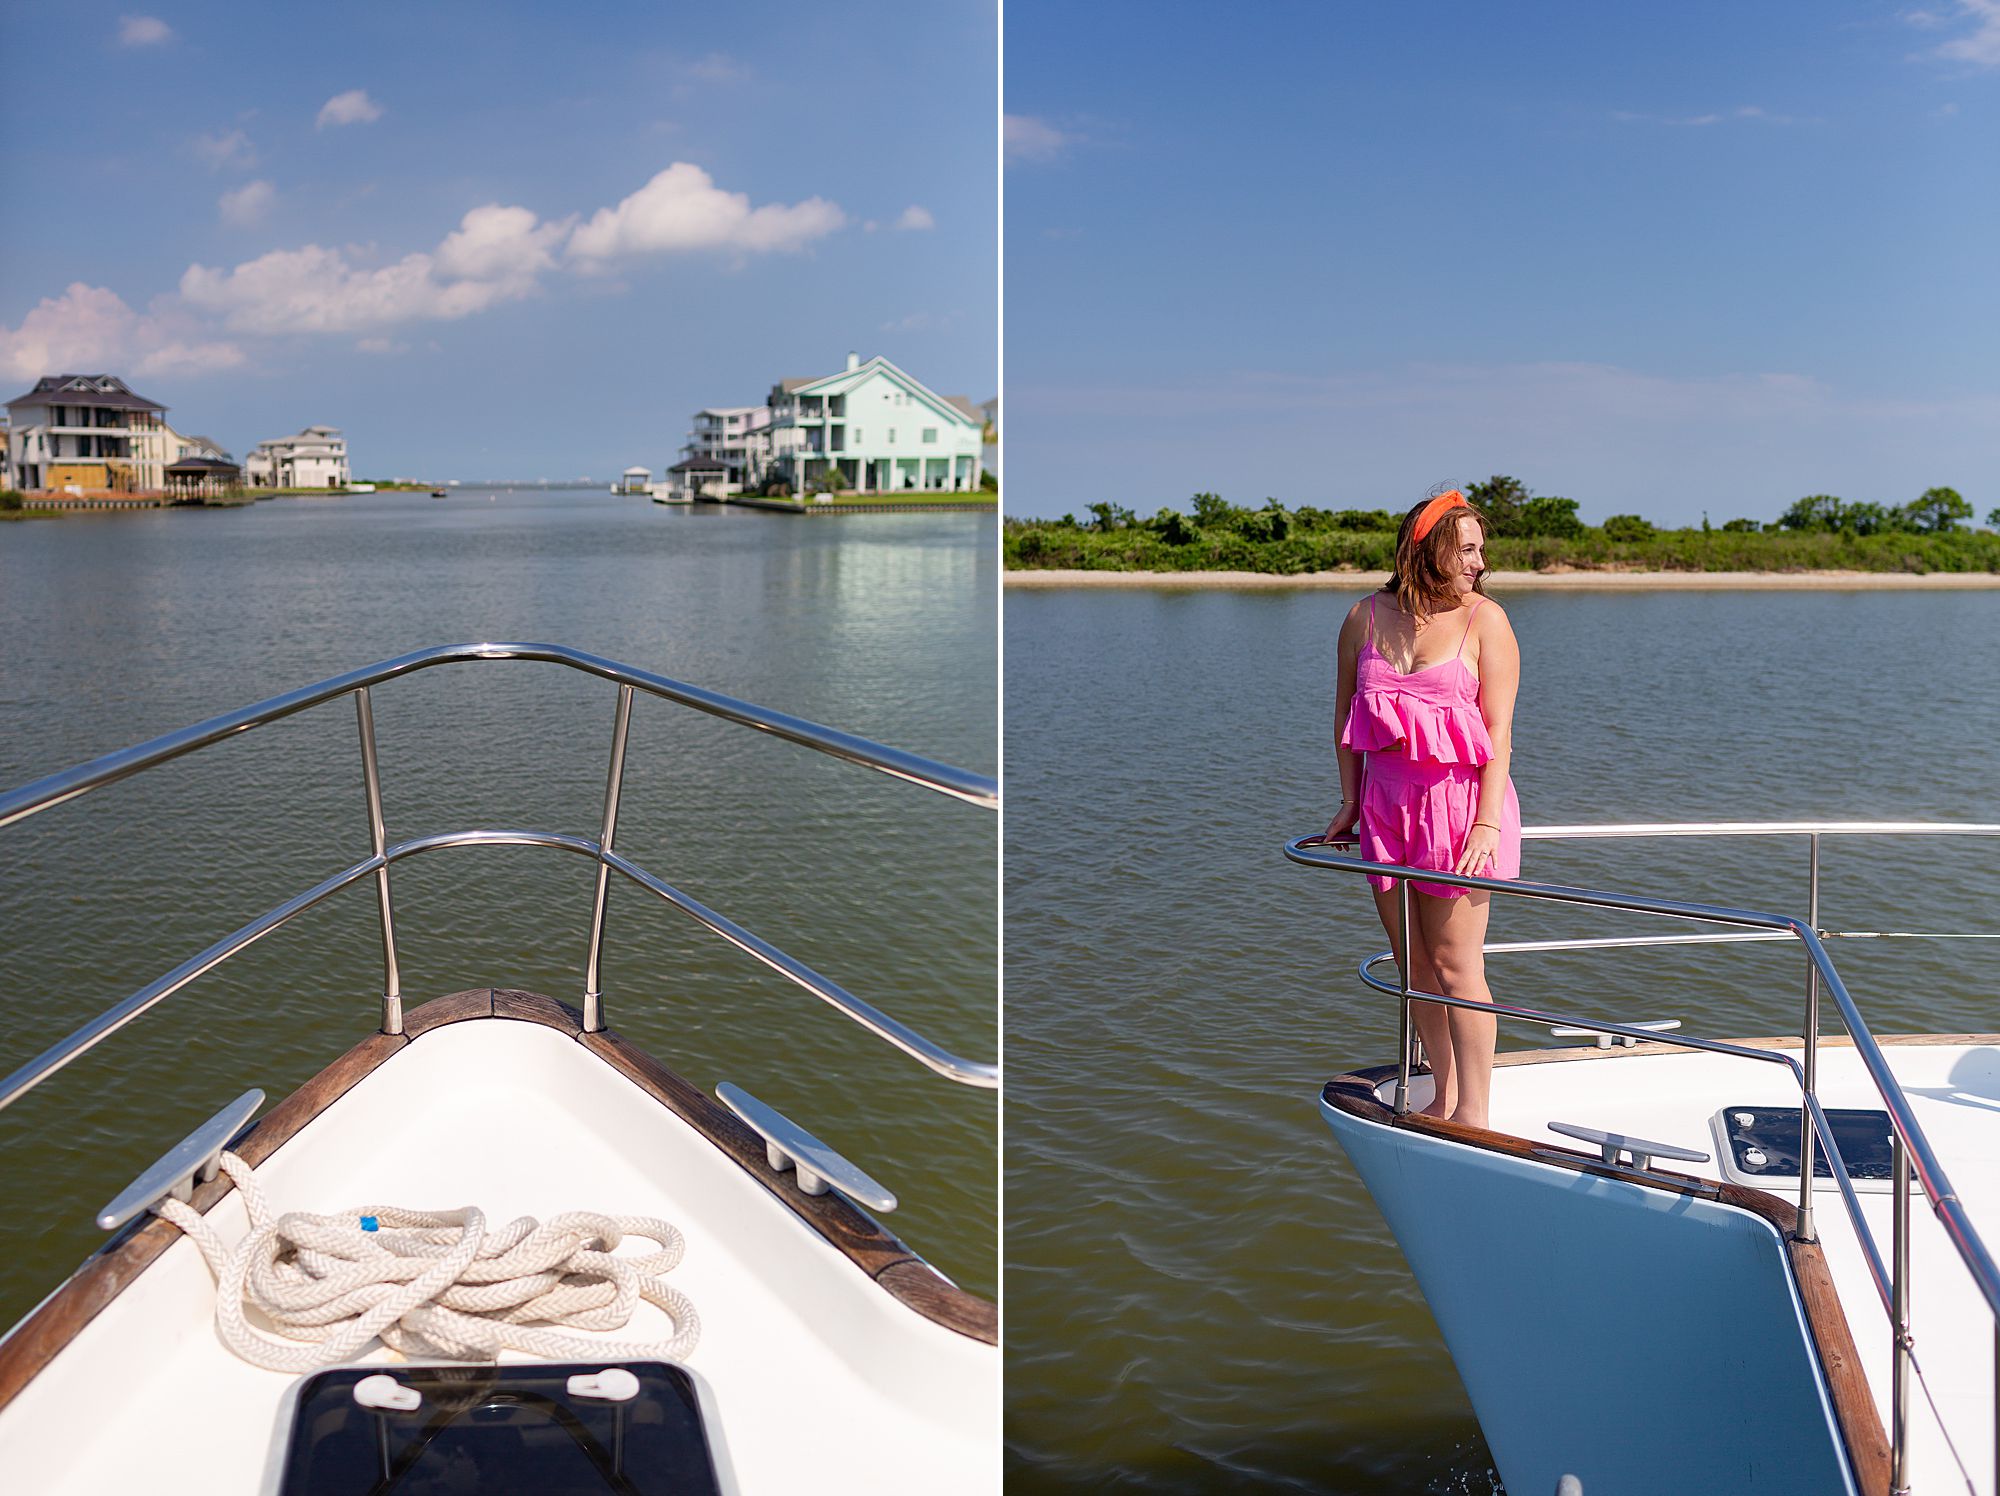 Brooke from Aesthetically Galveston stands at the bow of Galveston Yacht.